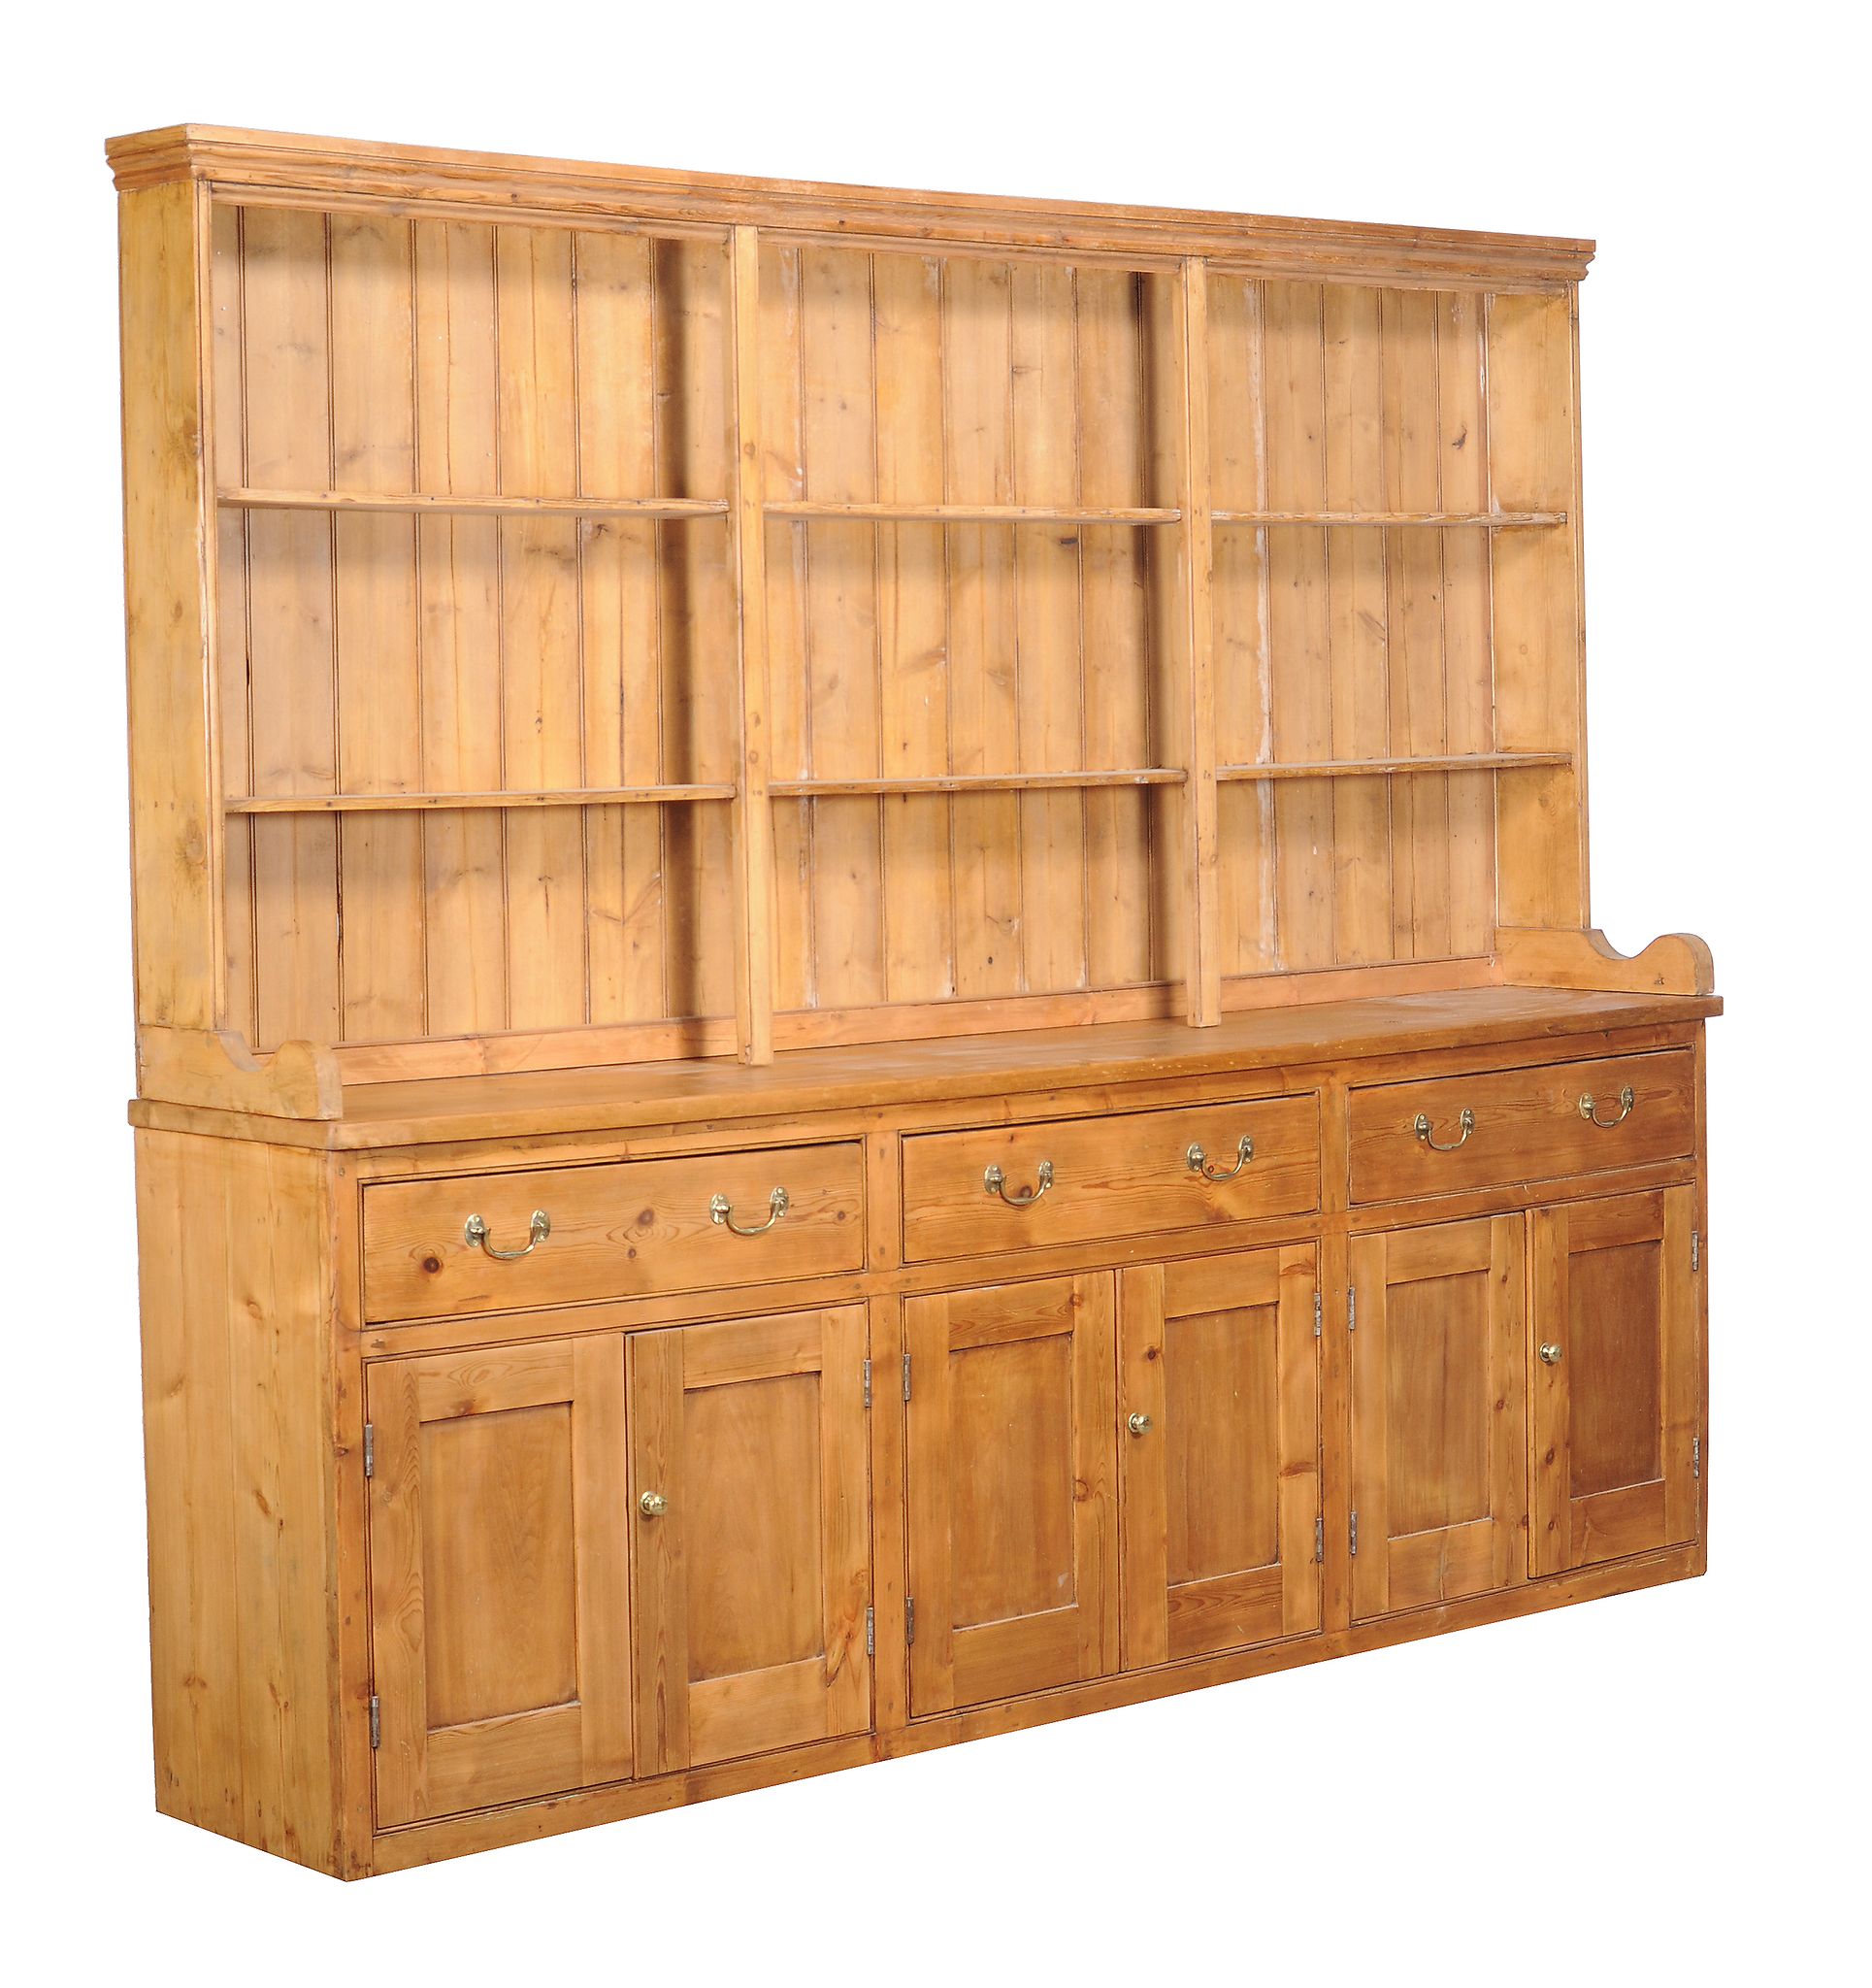 A waxed pine dresser in Victorian style, 20th century, or large proportion, the plate rack canopy